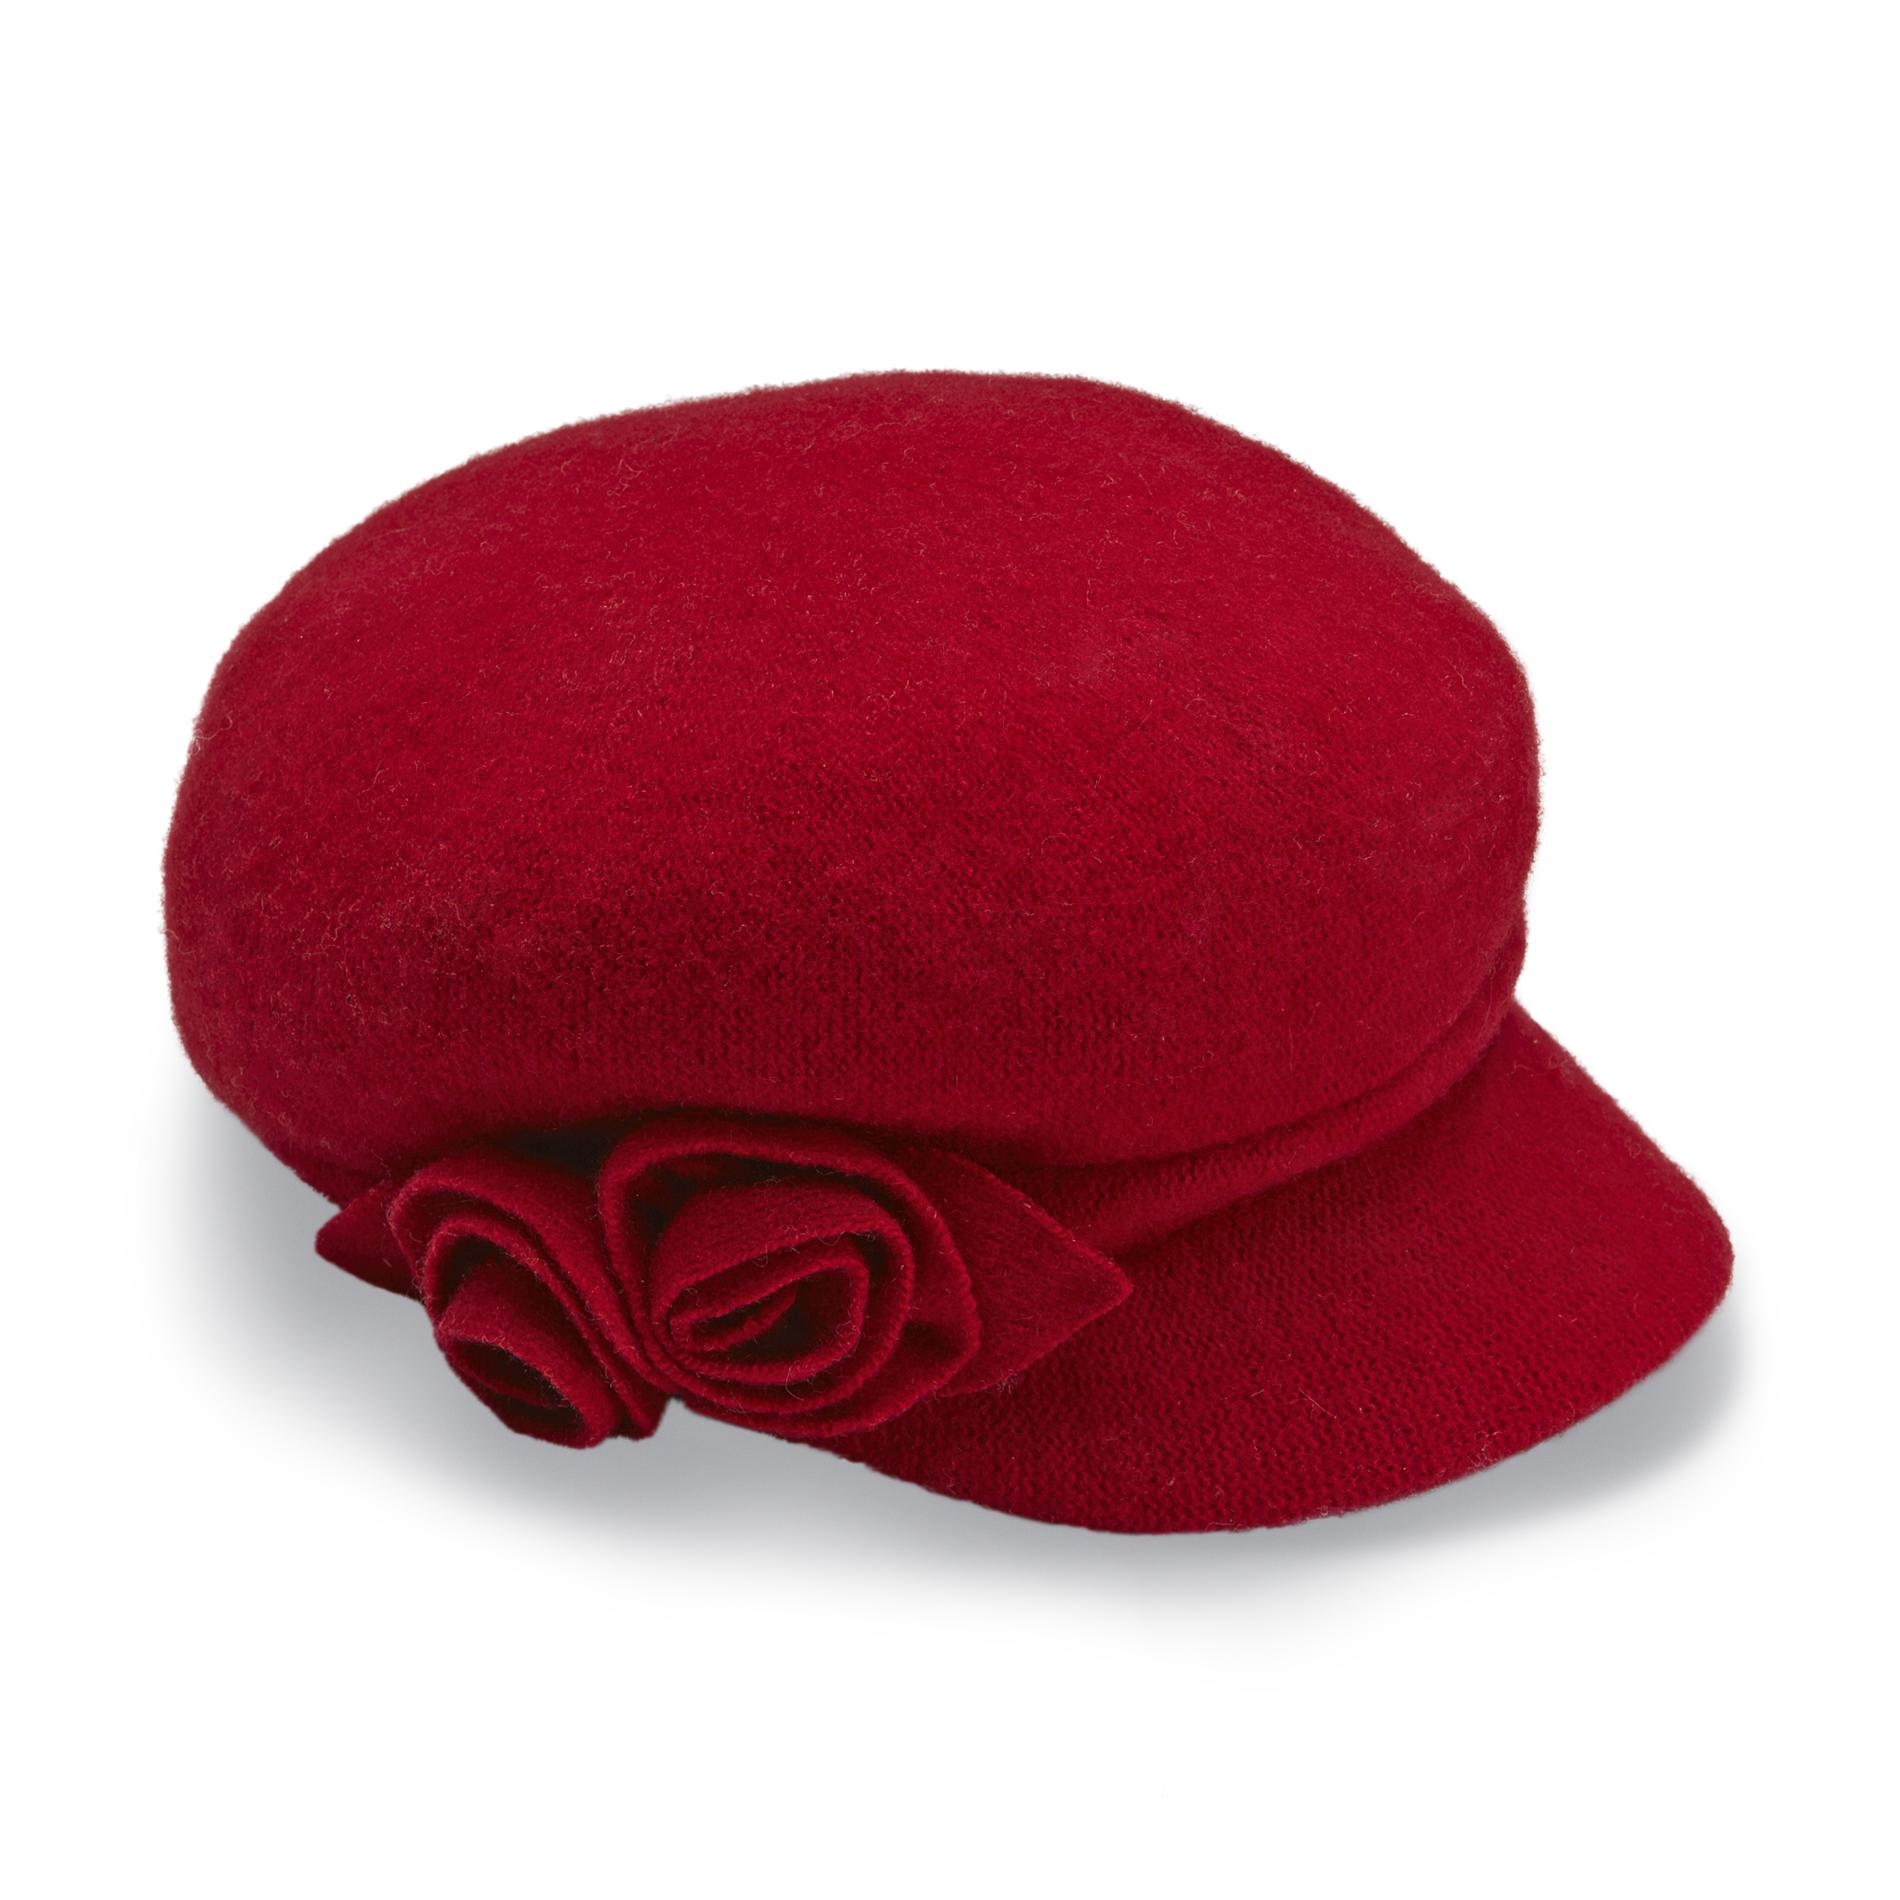 Attention Women's Felted Rosette Cabbie Hat